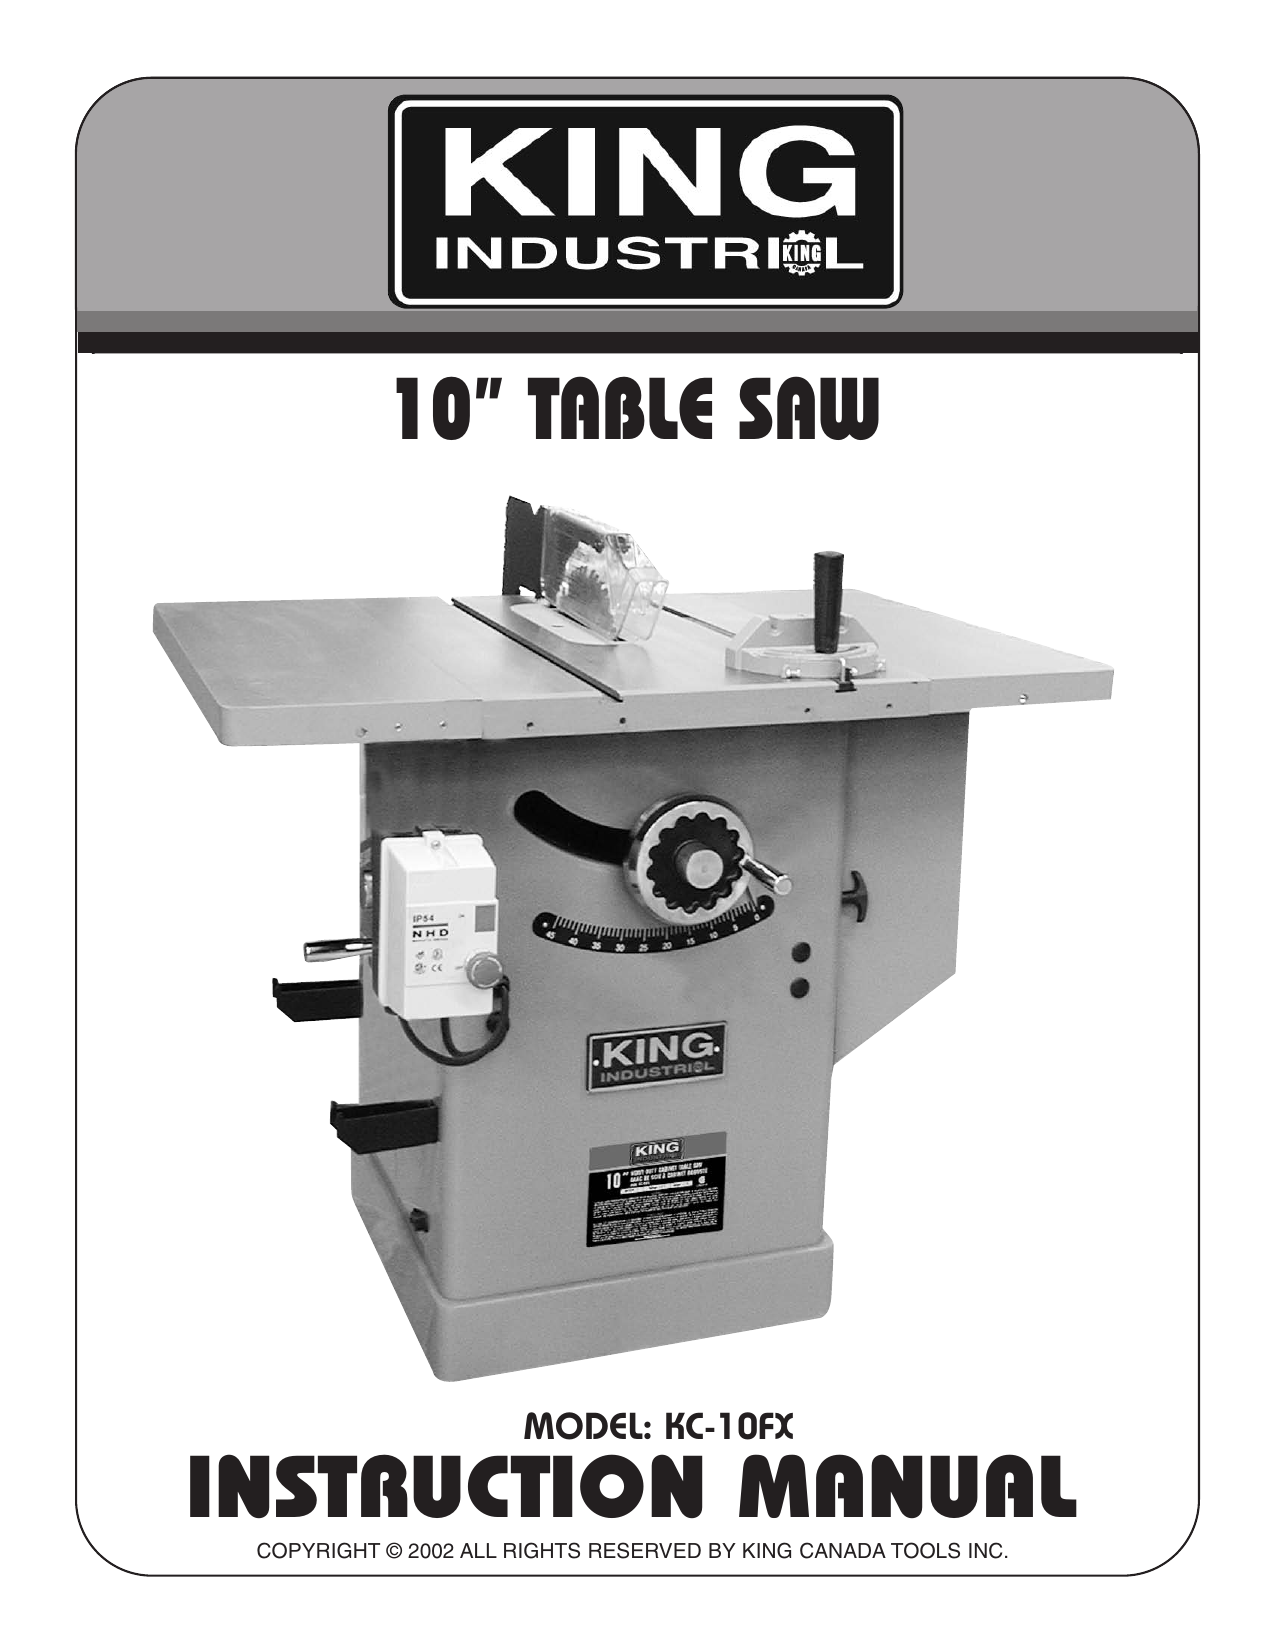 King Canada Kc 10fx Table Saw No Fence